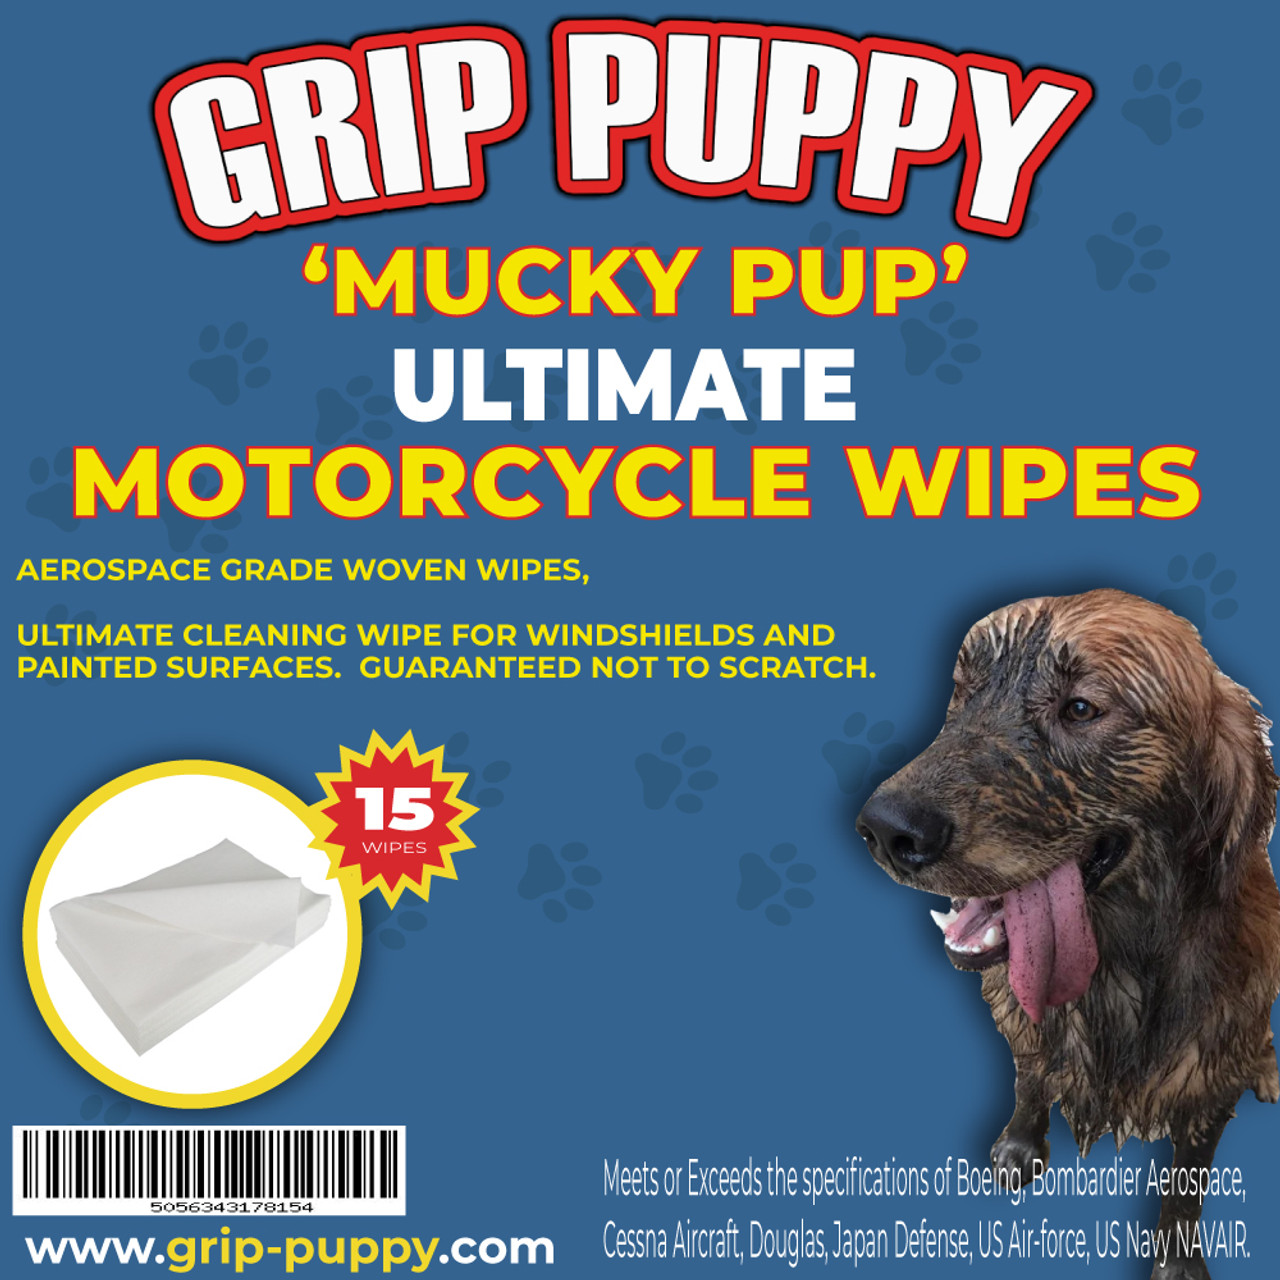 GRIP PUPPY MUCKY PUP ULTIMATE MOTORCYCLE WINDSHIELD PAINT CLEANING WIPES